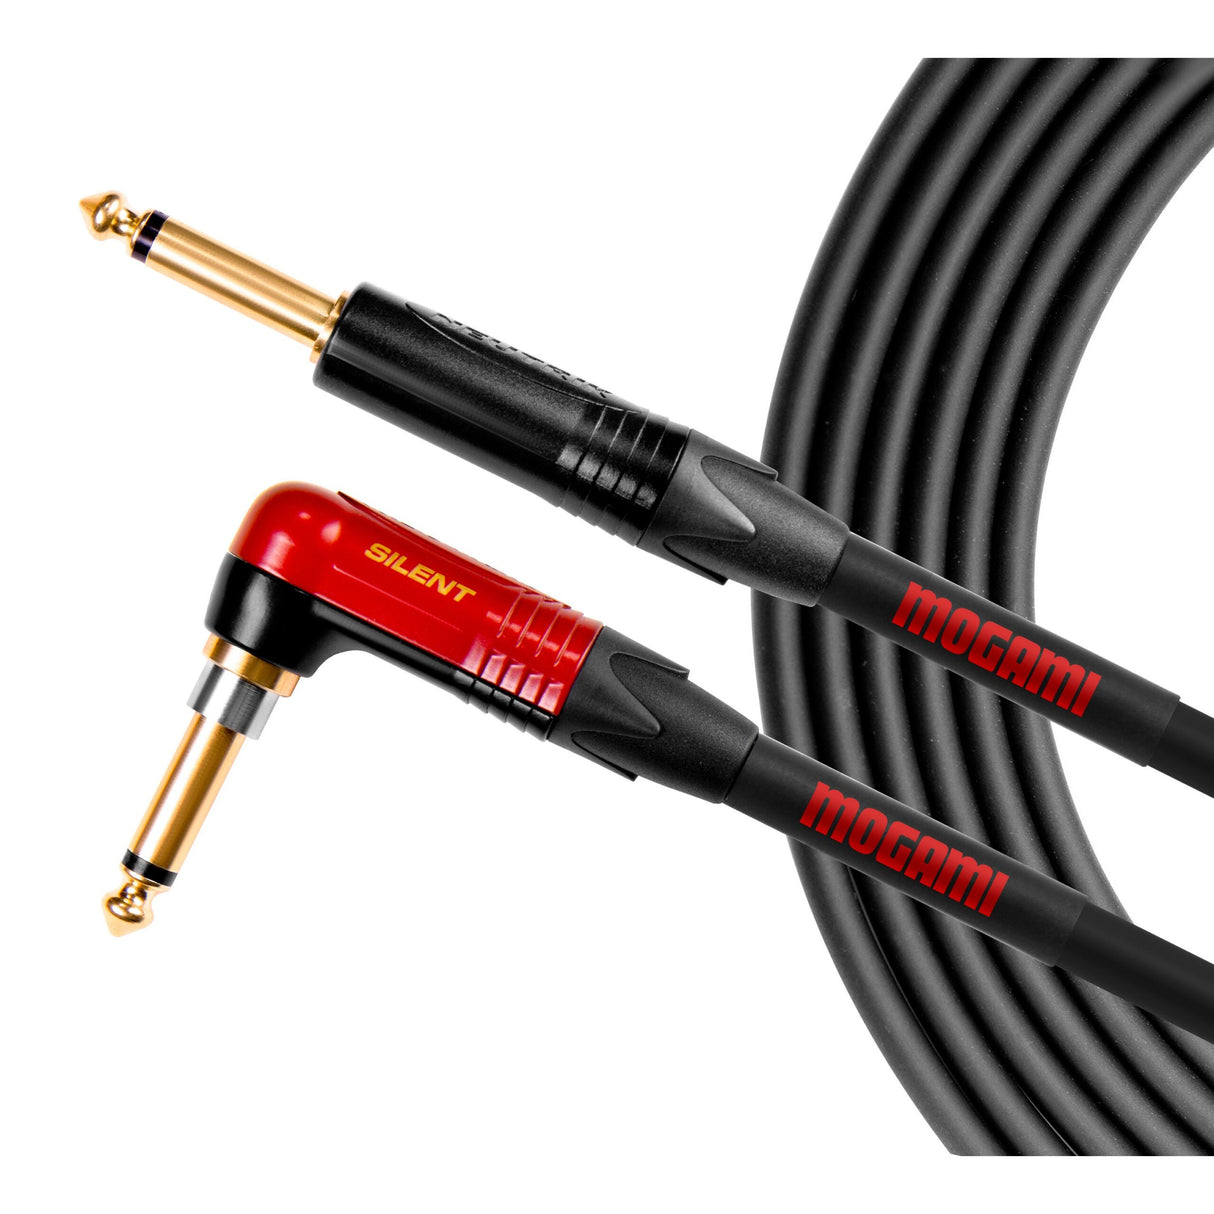 Mogami OD GTR 30 Silent R Right Angle Overdrive Guitar Cable, 30-Foot